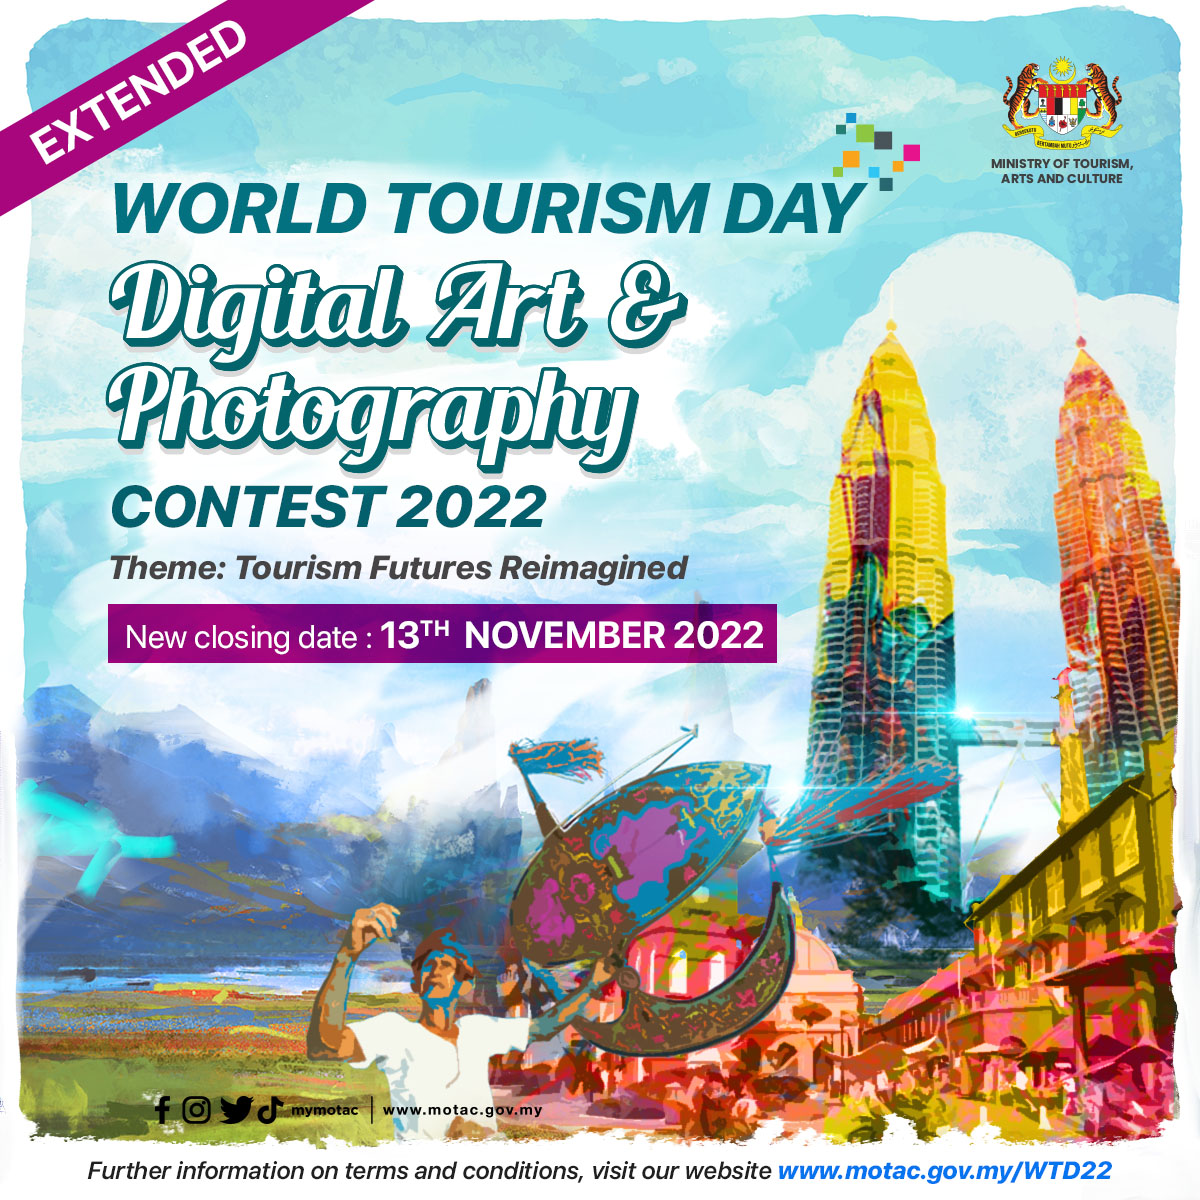 World Tourism Day Digital Art and Photography Contest 2022